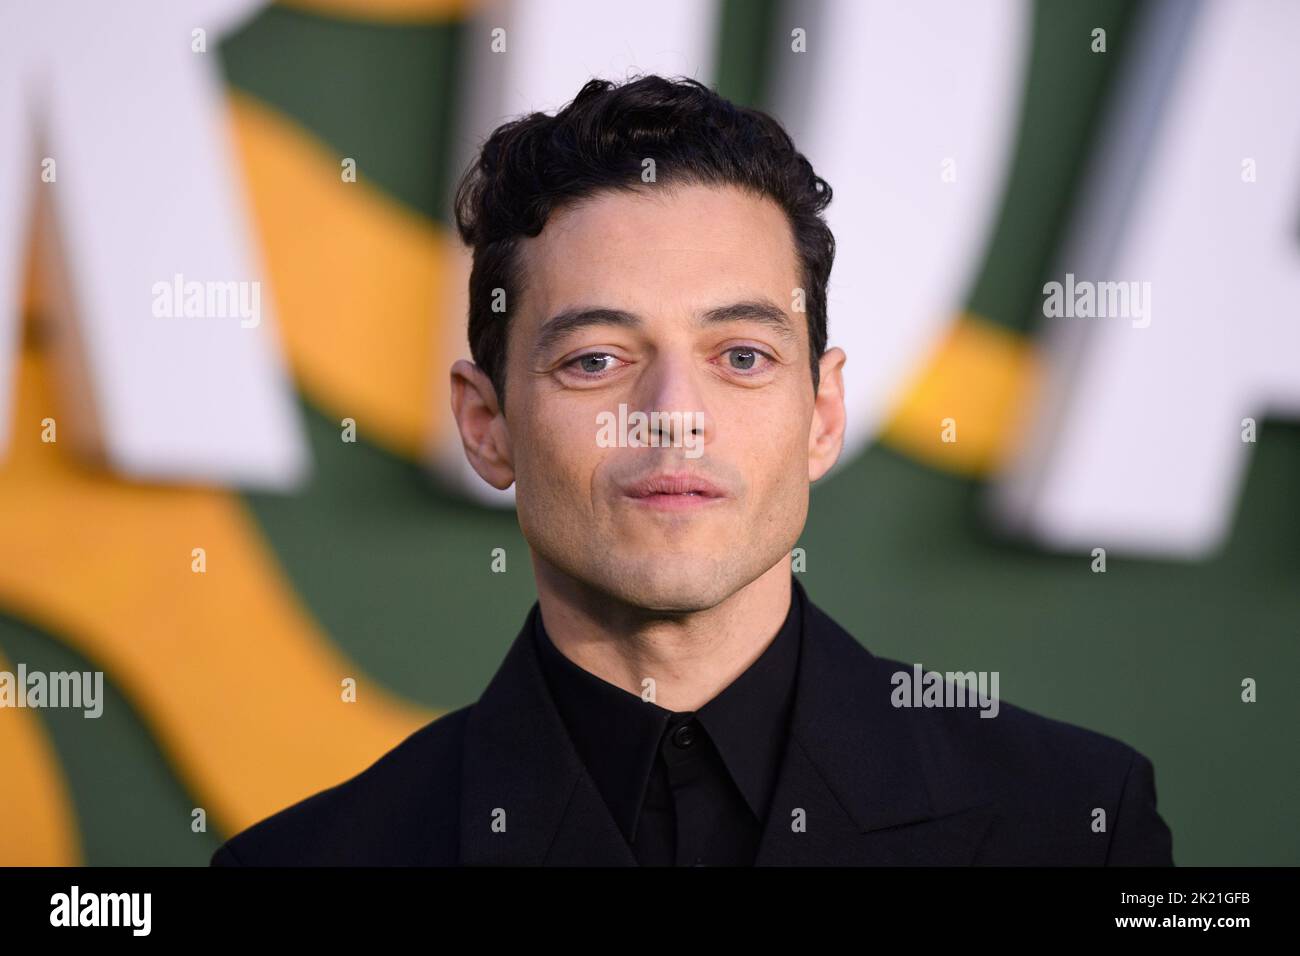 London, UK. 22 September 2022. Rami Malek attending the European premiere of Amsterdam at the Odeon Luxe Leicester Square Cinema, London Picture date: Thursday September 22, 2022. Photo credit should read: Matt Crossick/Empics/Alamy Live News Stock Photo